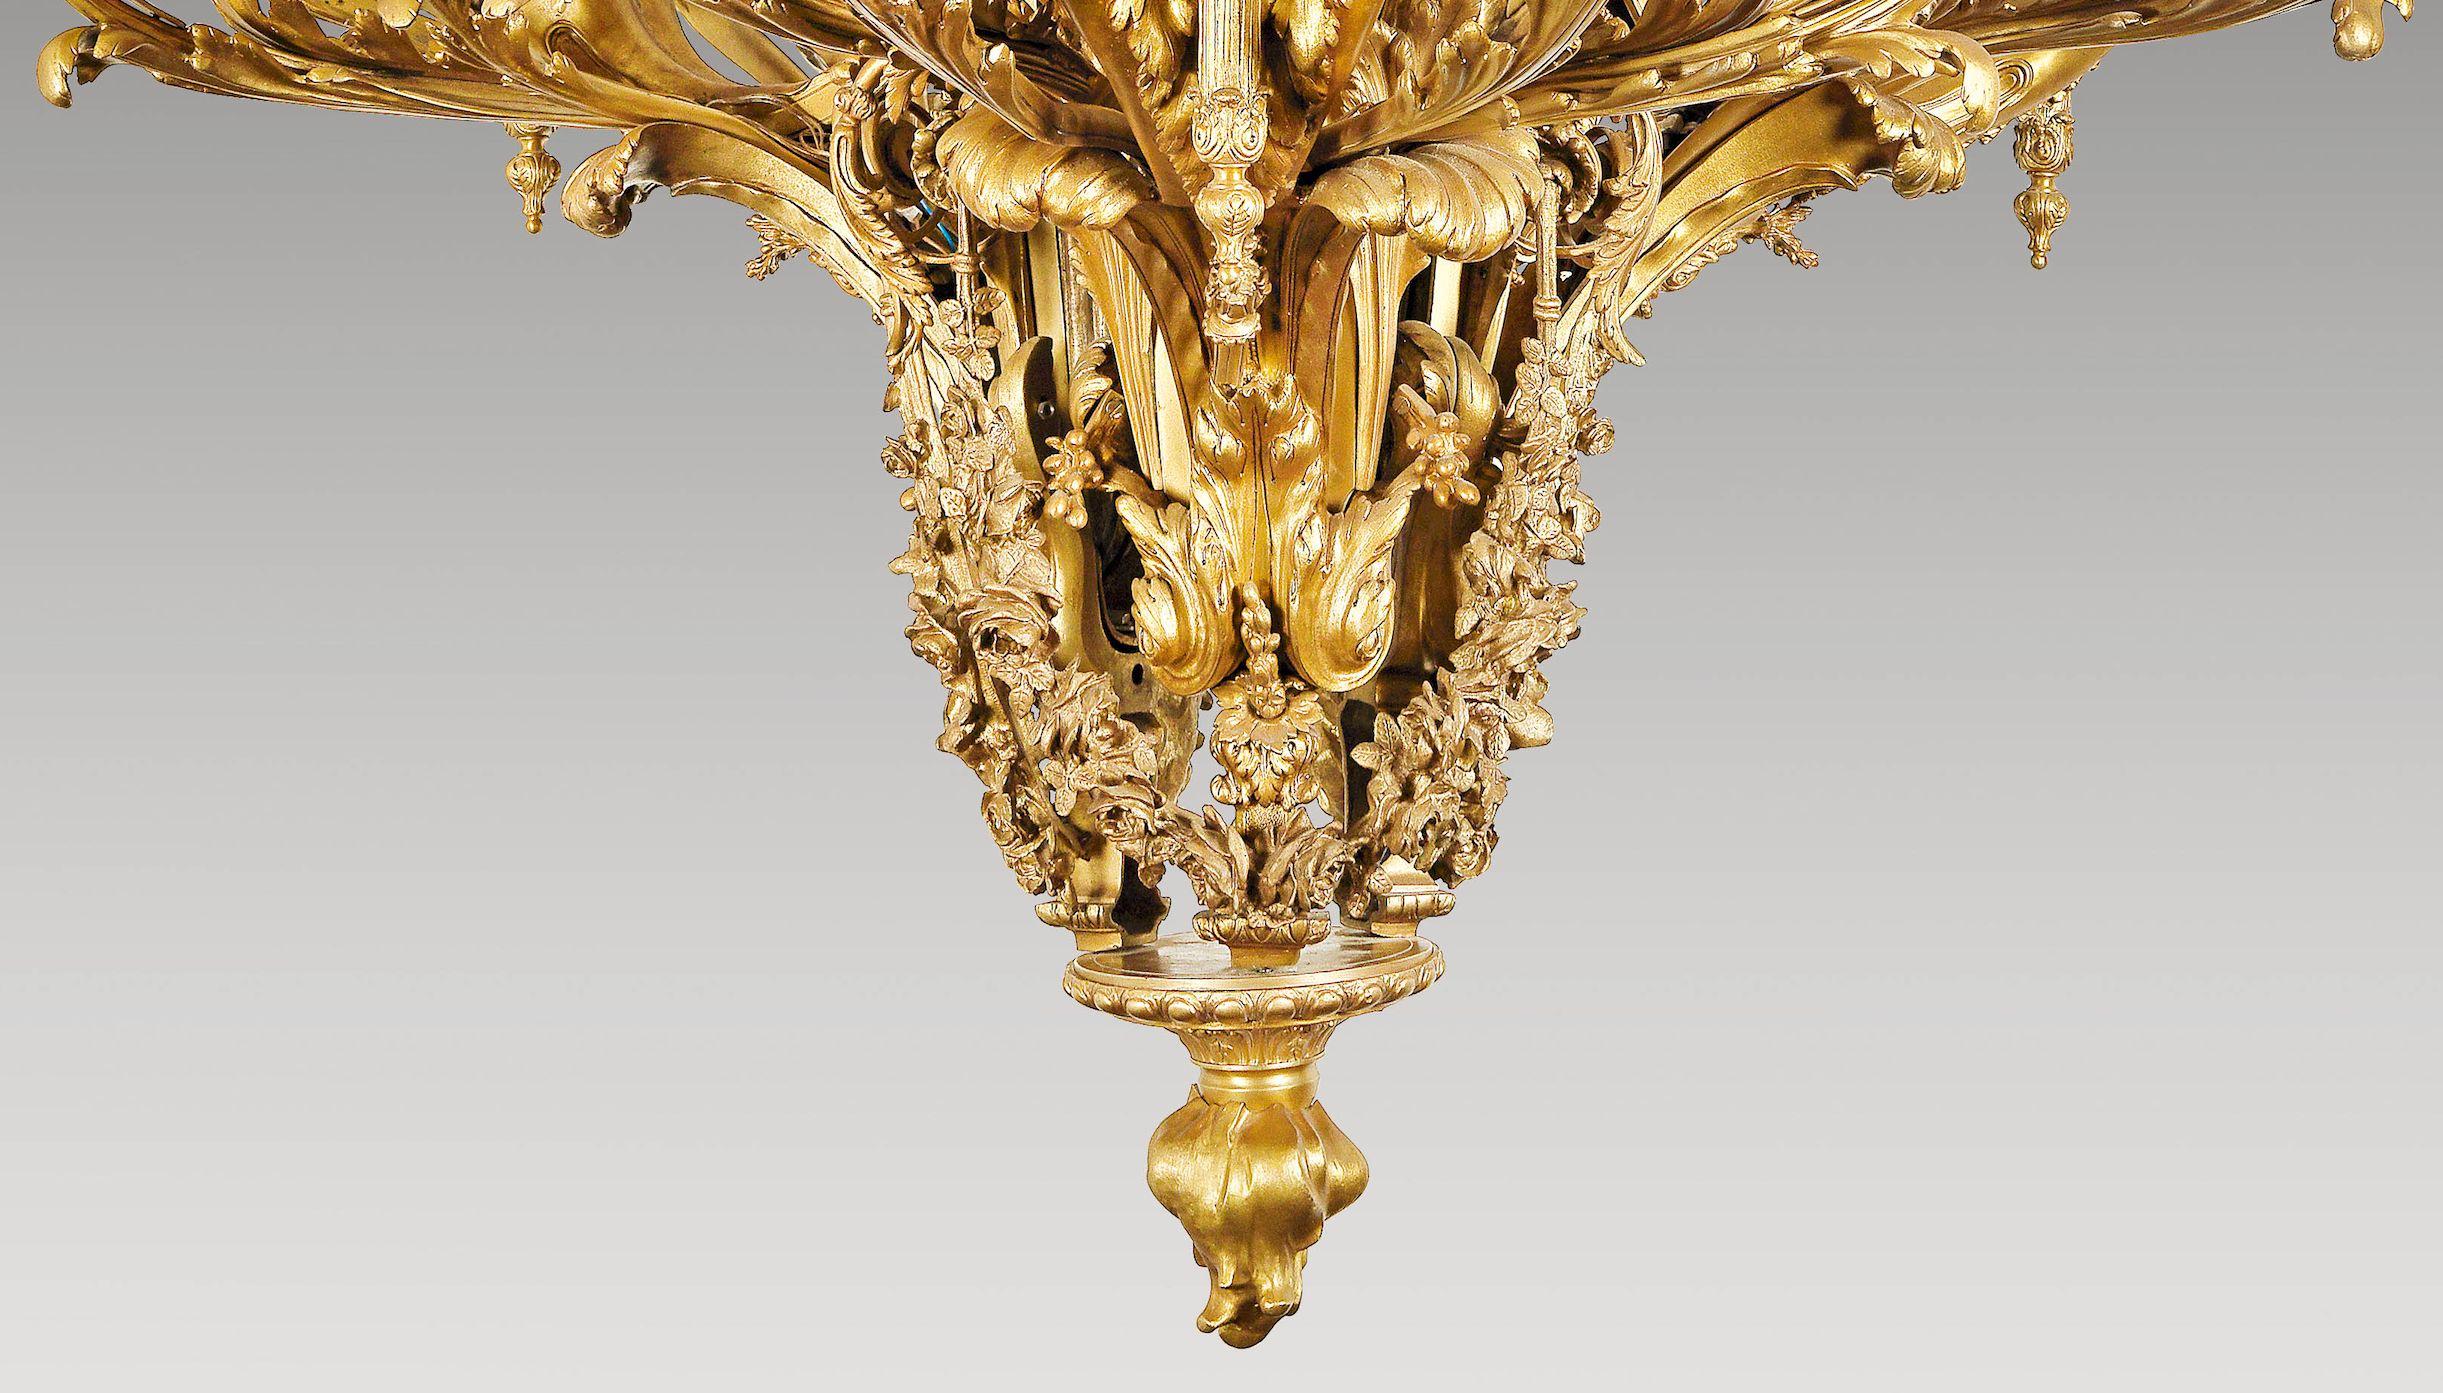 Finely chased and gilded bronze. 39-flame electric mounted, bronze frame with main branches in two-stage crown form, each main branch consists of fully-plastic cast, mermaid women facing each other, each holding a seven-flame candelabra, rich floral